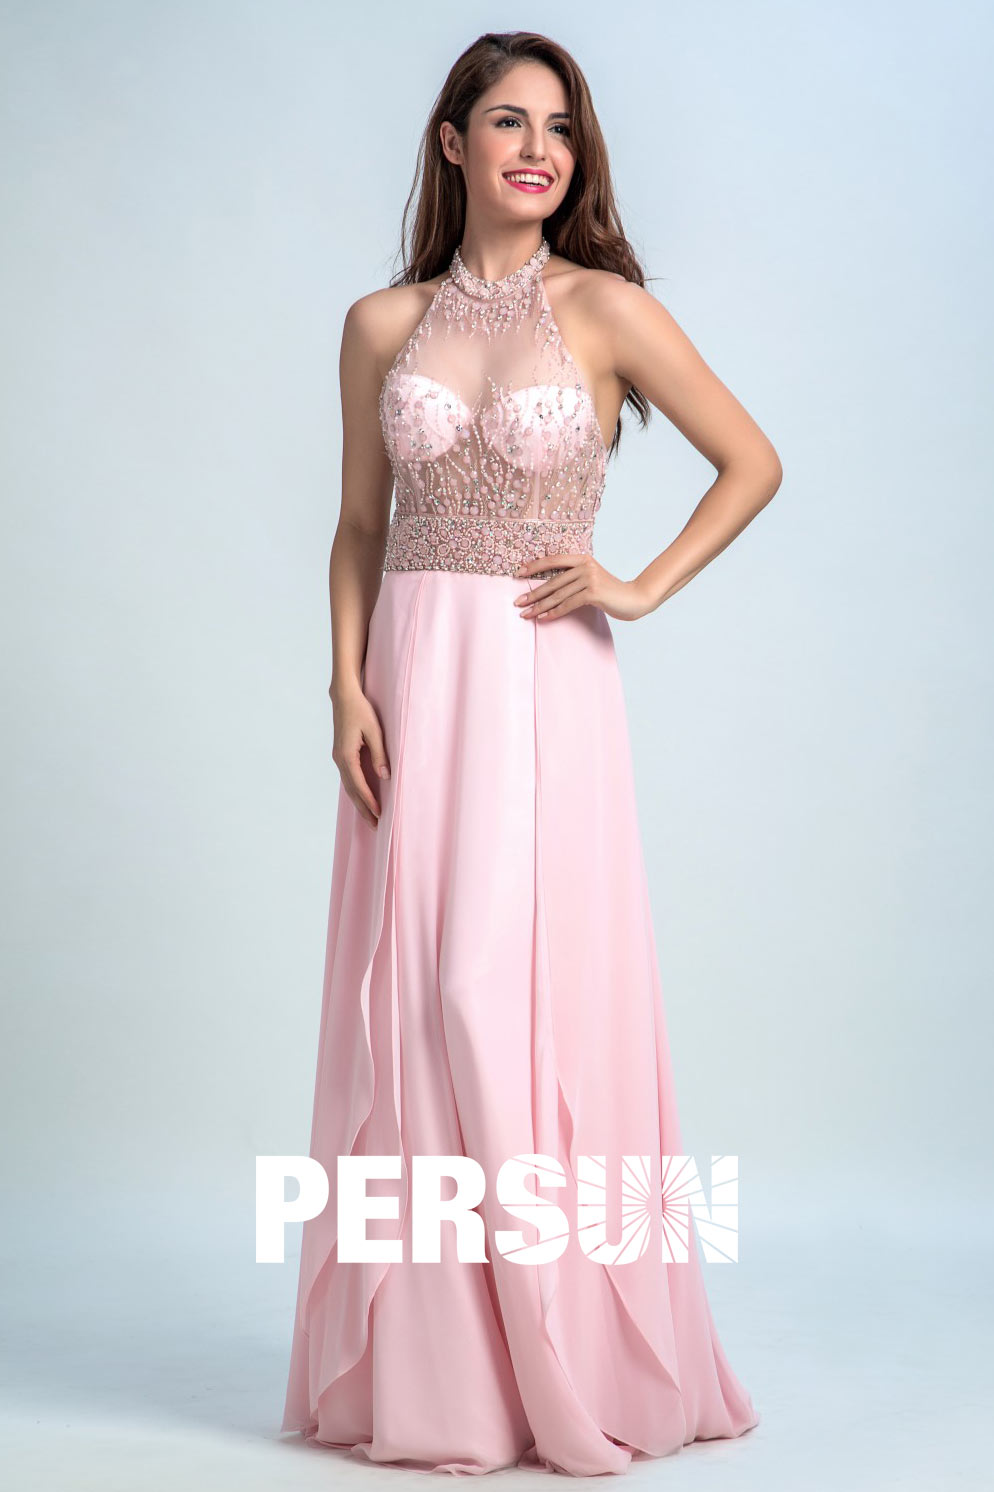 Persun Sexy Sheer Backless Crystal Details Long Prom Dress